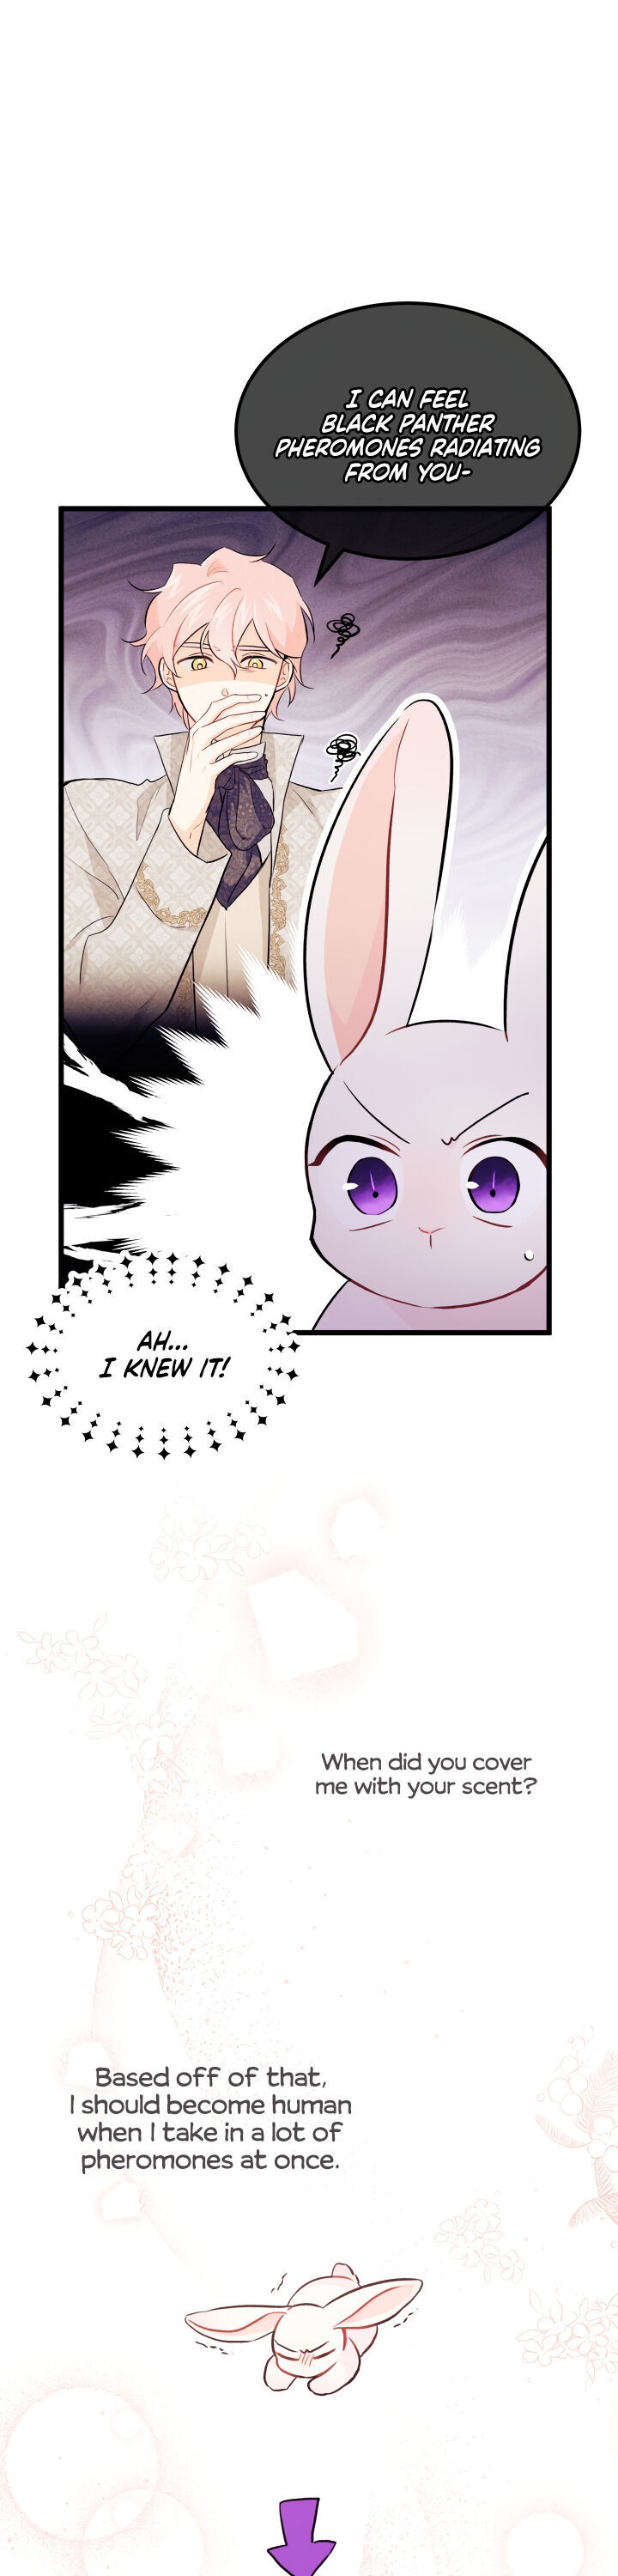 A Symbiotic Relationship Between A Rabbit And A Black Panther - Chapter 22 Page 14